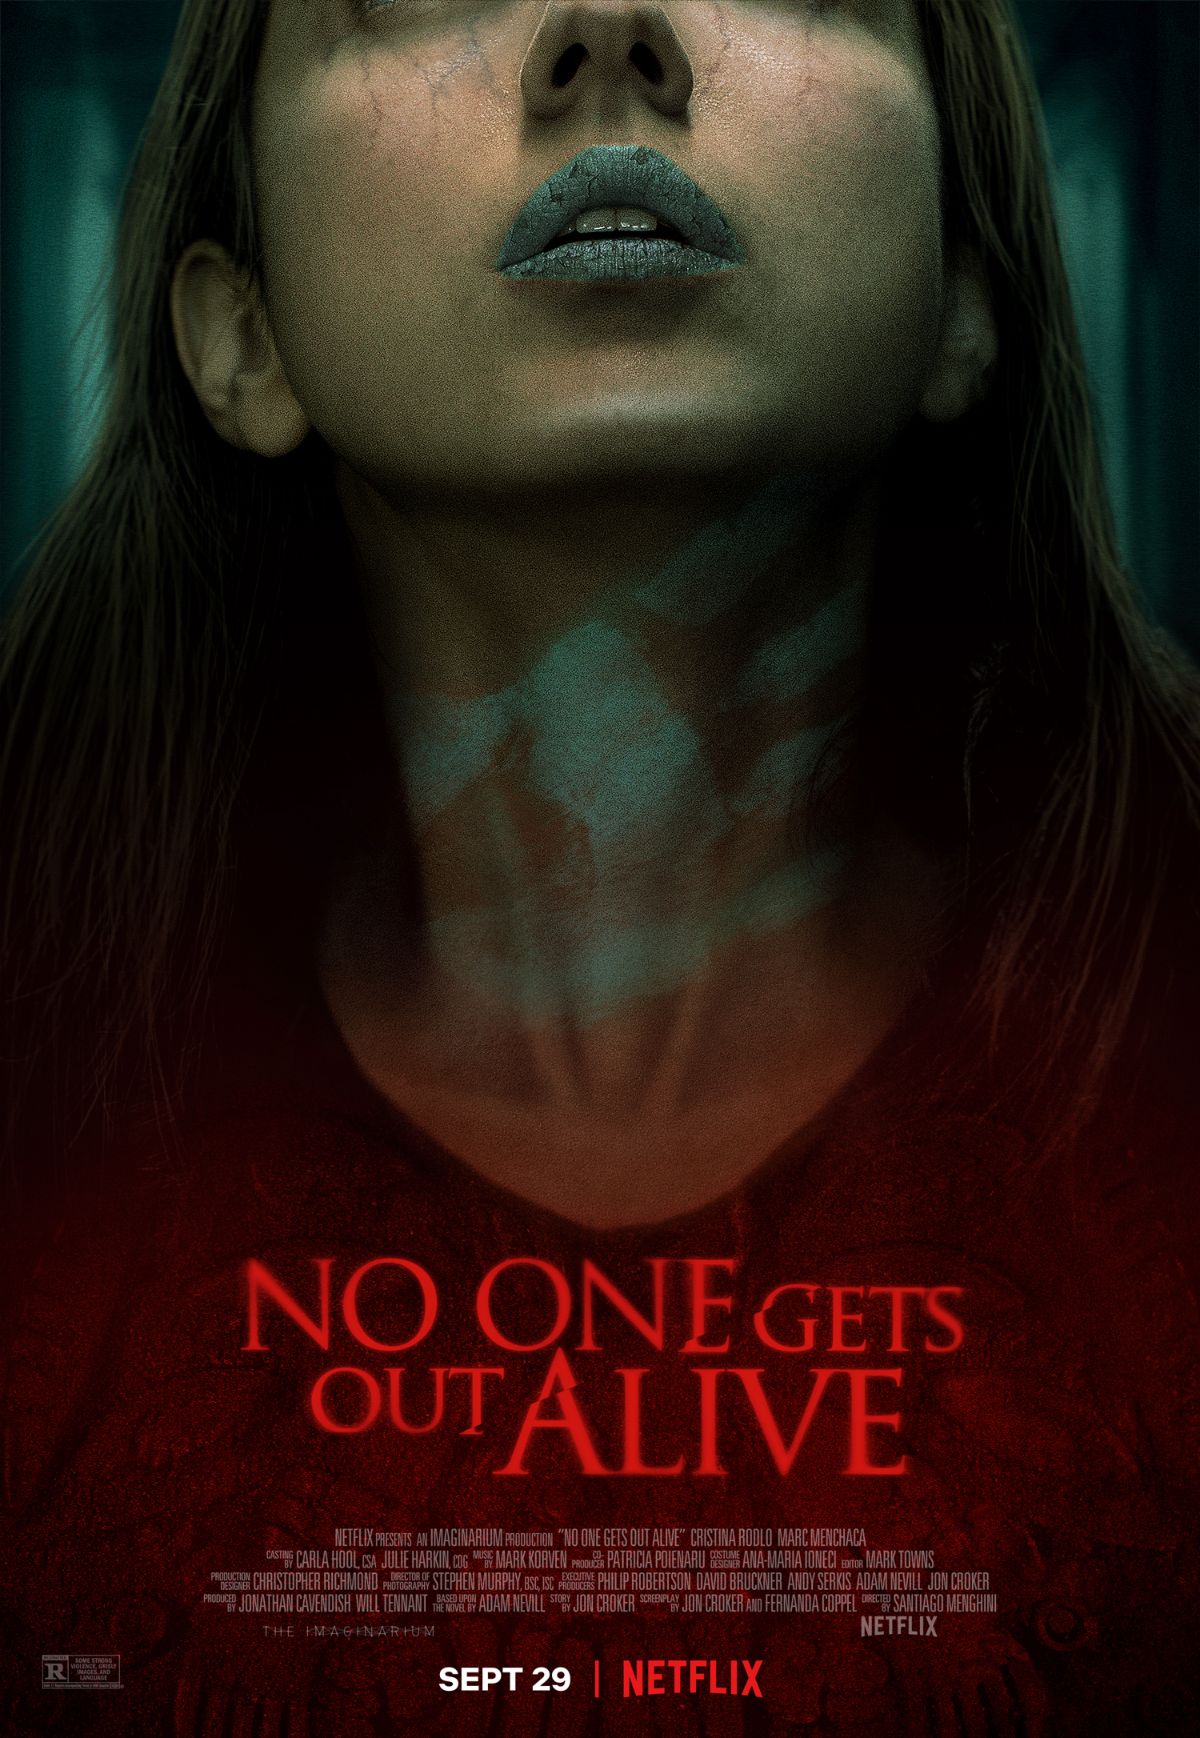 Netflix Horror Filming locations : More On No One Gets Out Alive filming location